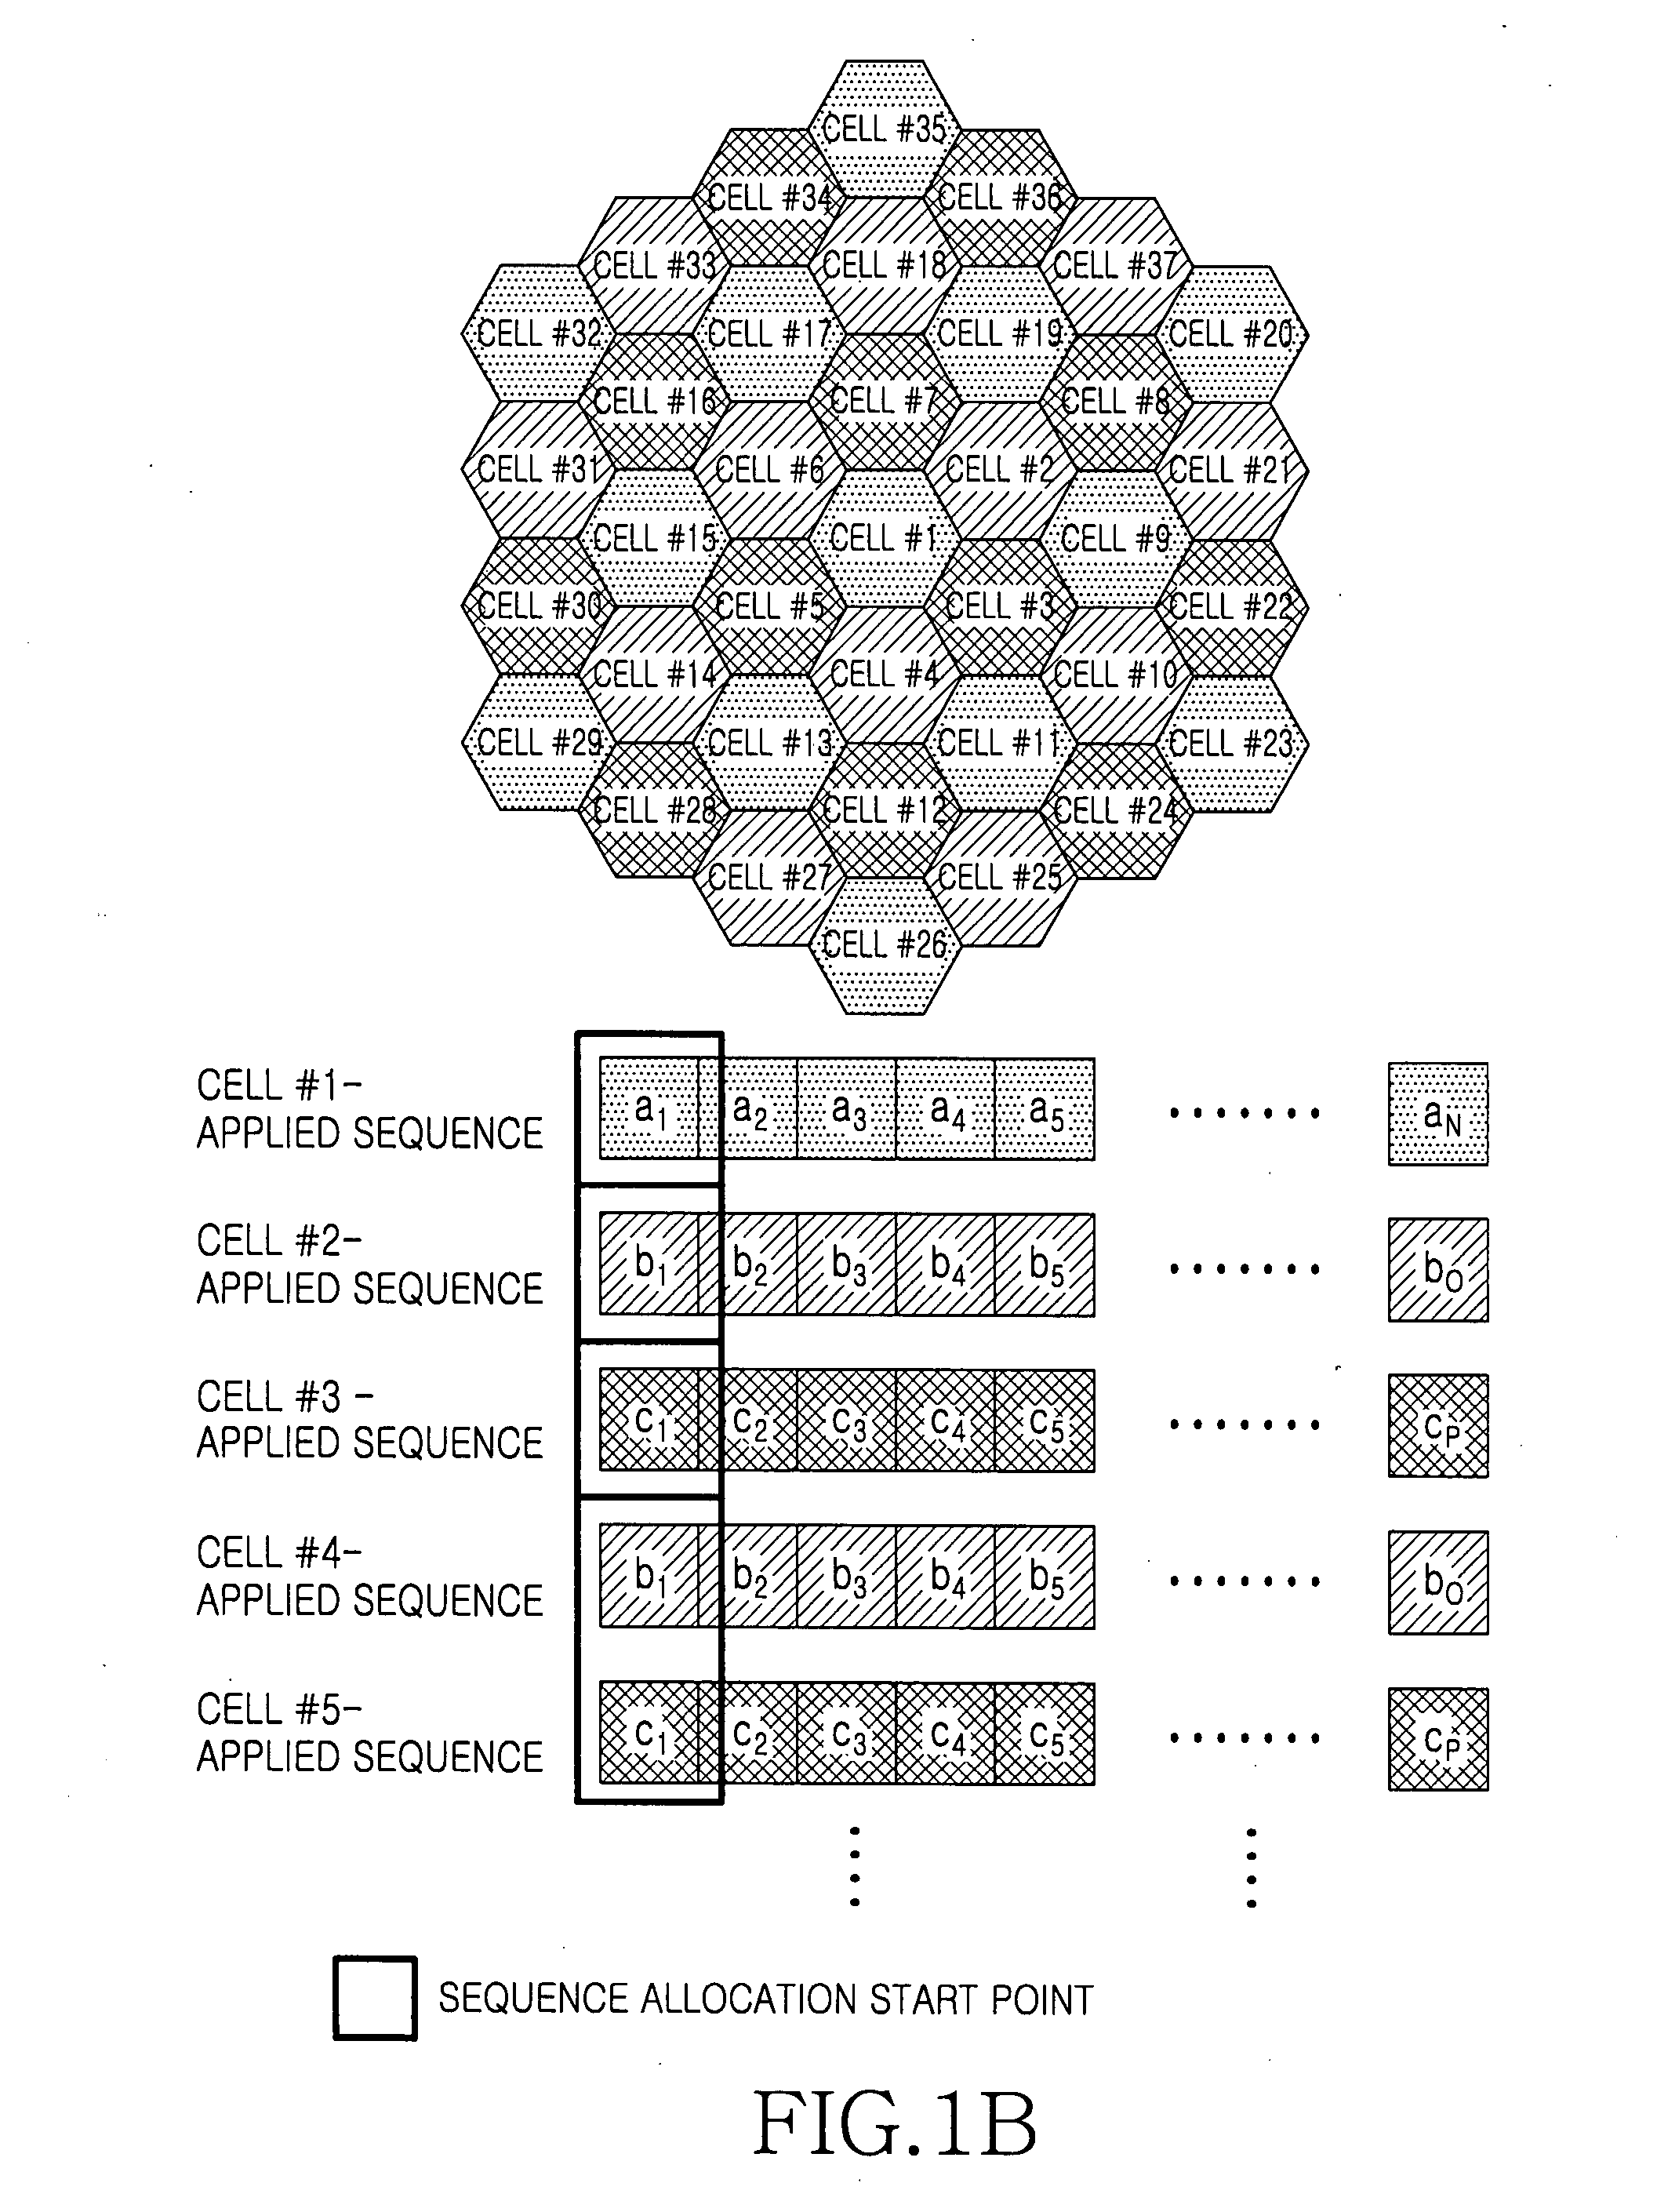 Method and system for using resources in a multi-cell communication system